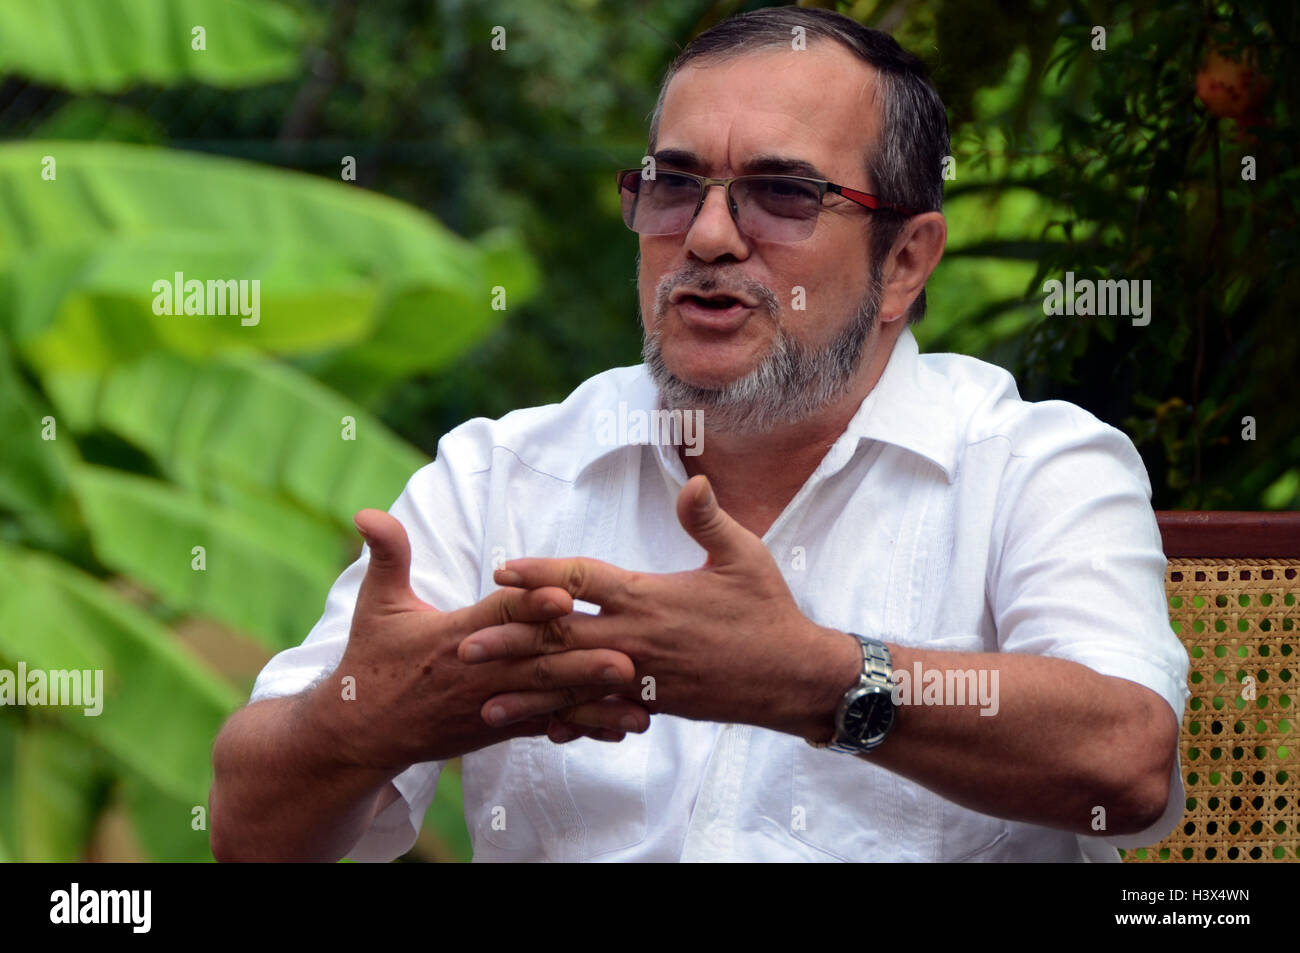 Havana, Cuba. 11th Oct, 2016. Top leader of the Revolutionary Armed Forces of Colombia (FARC) Rodrigo Londono, also known as Timoleon Jimenez, speaks during an exclusive interview with Xinhua in Havana, Cuba, Oct. 11, 2016. FARC is willing to talk with different political sectors to enrich the peace agreement which he and Colombian President Juan Manuel Santos have signed, Rodrigo Londono said, refusing to renegotiate the agreement. © Joaquin Hernandez/Xinhua/Alamy Live News Stock Photo